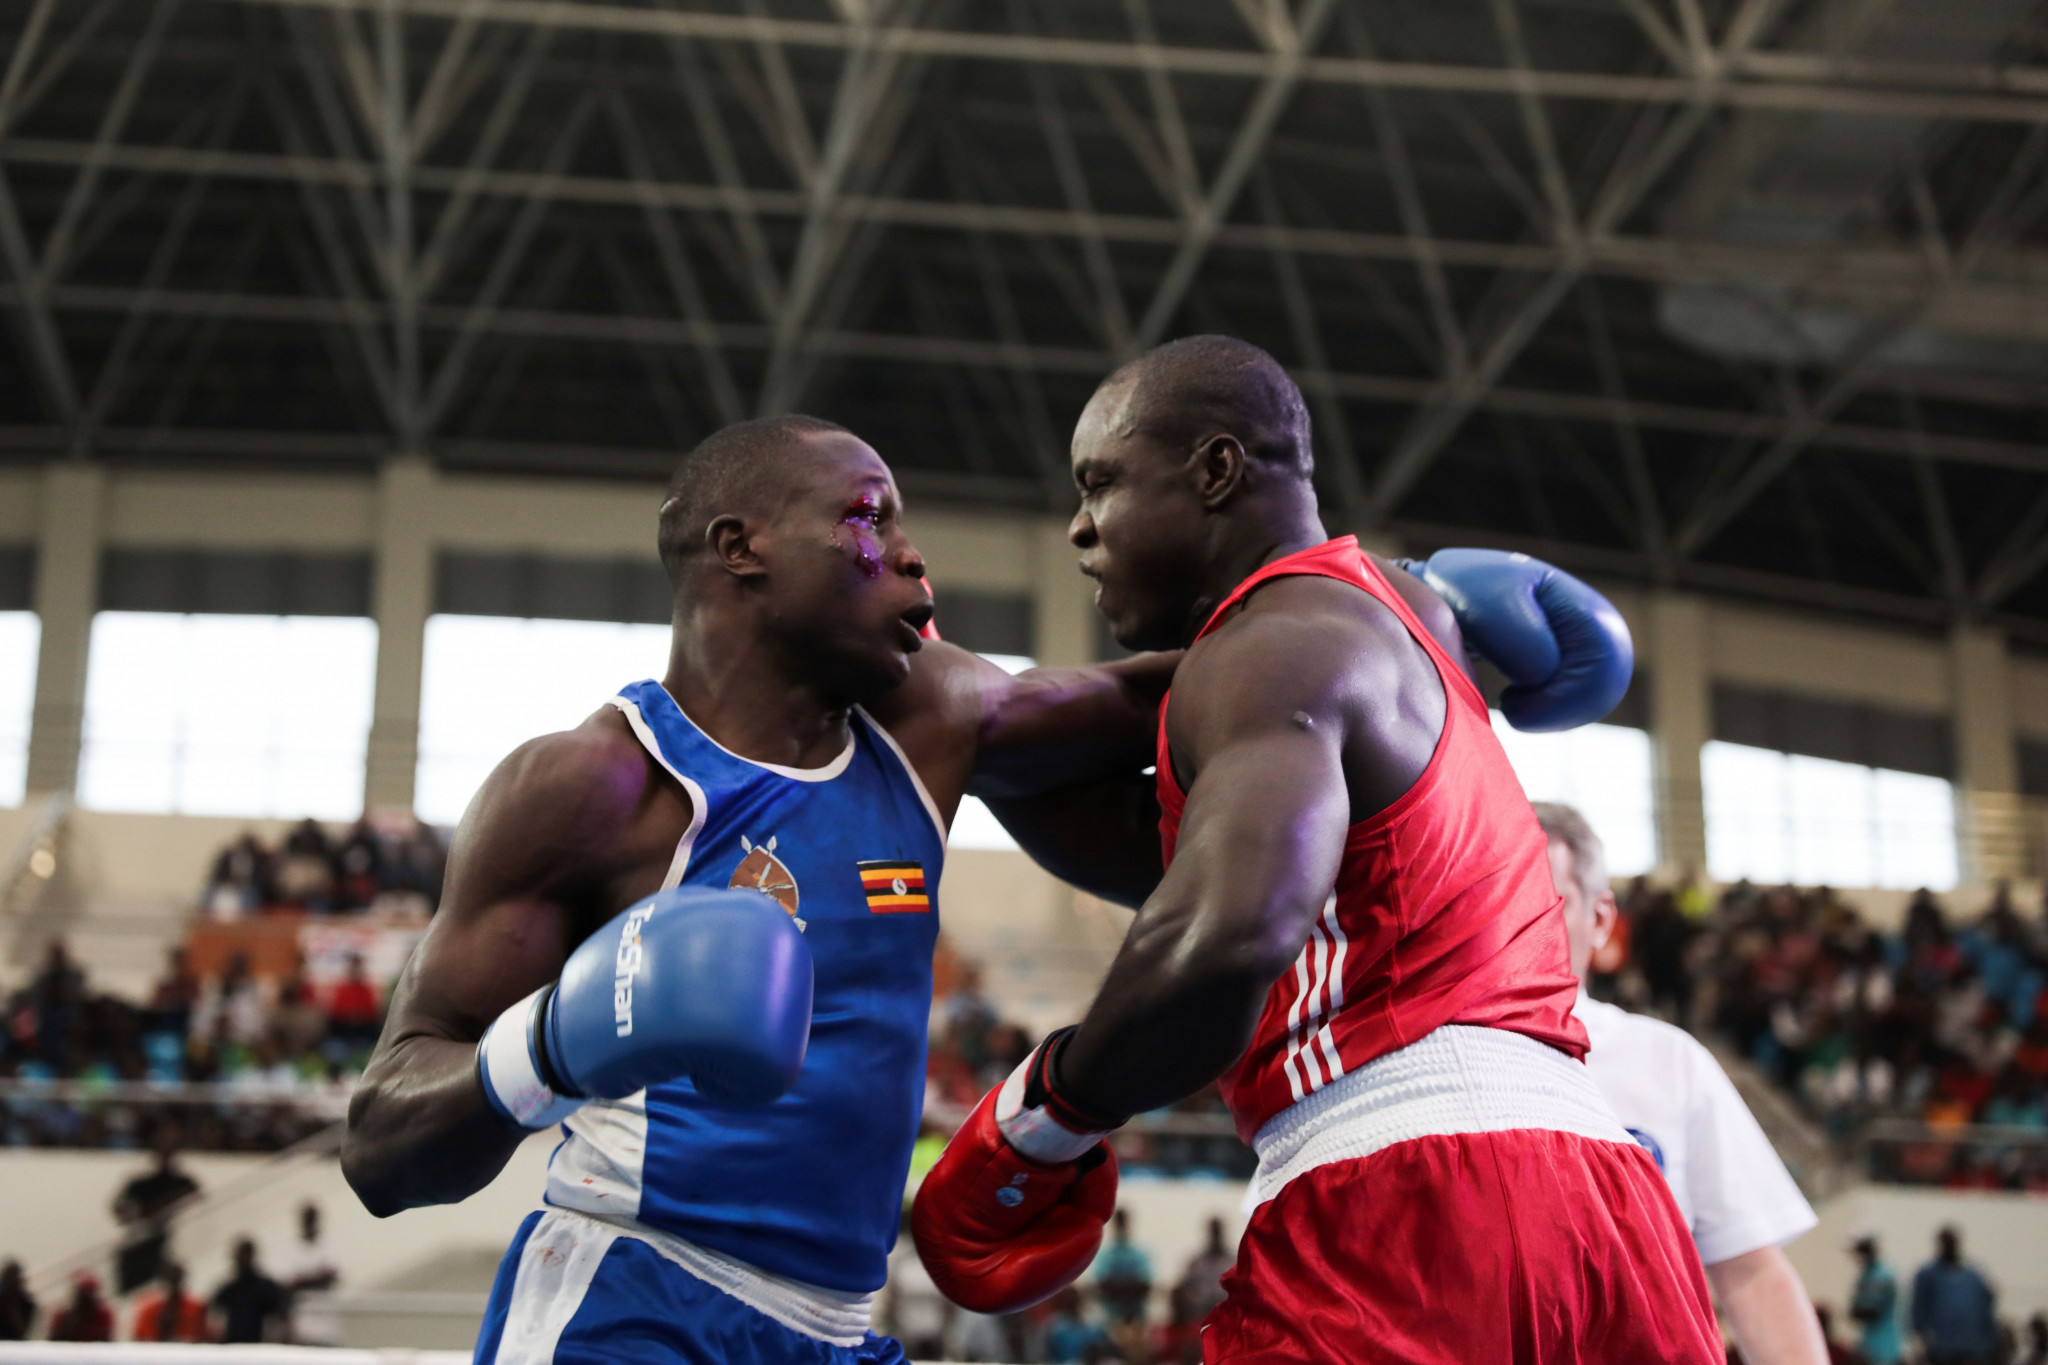 Uganda Boxing Federation President Kenneth Gimugu claims AIBA removed super heavyweight David Ayiti from the entry list for the World Championships ©Getty Images